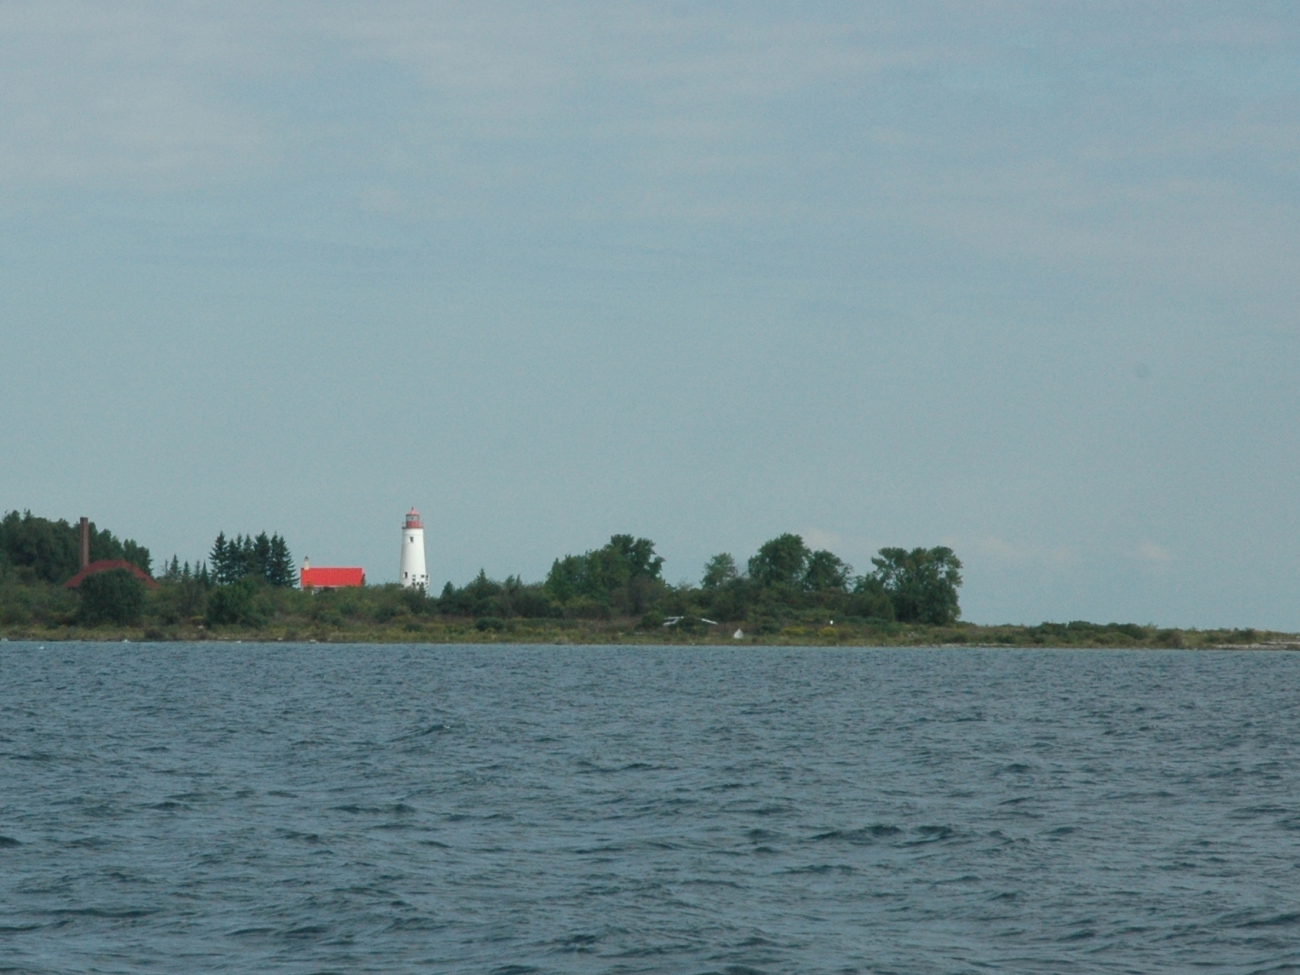 Thunder Bay Lighthouse seen in the distance